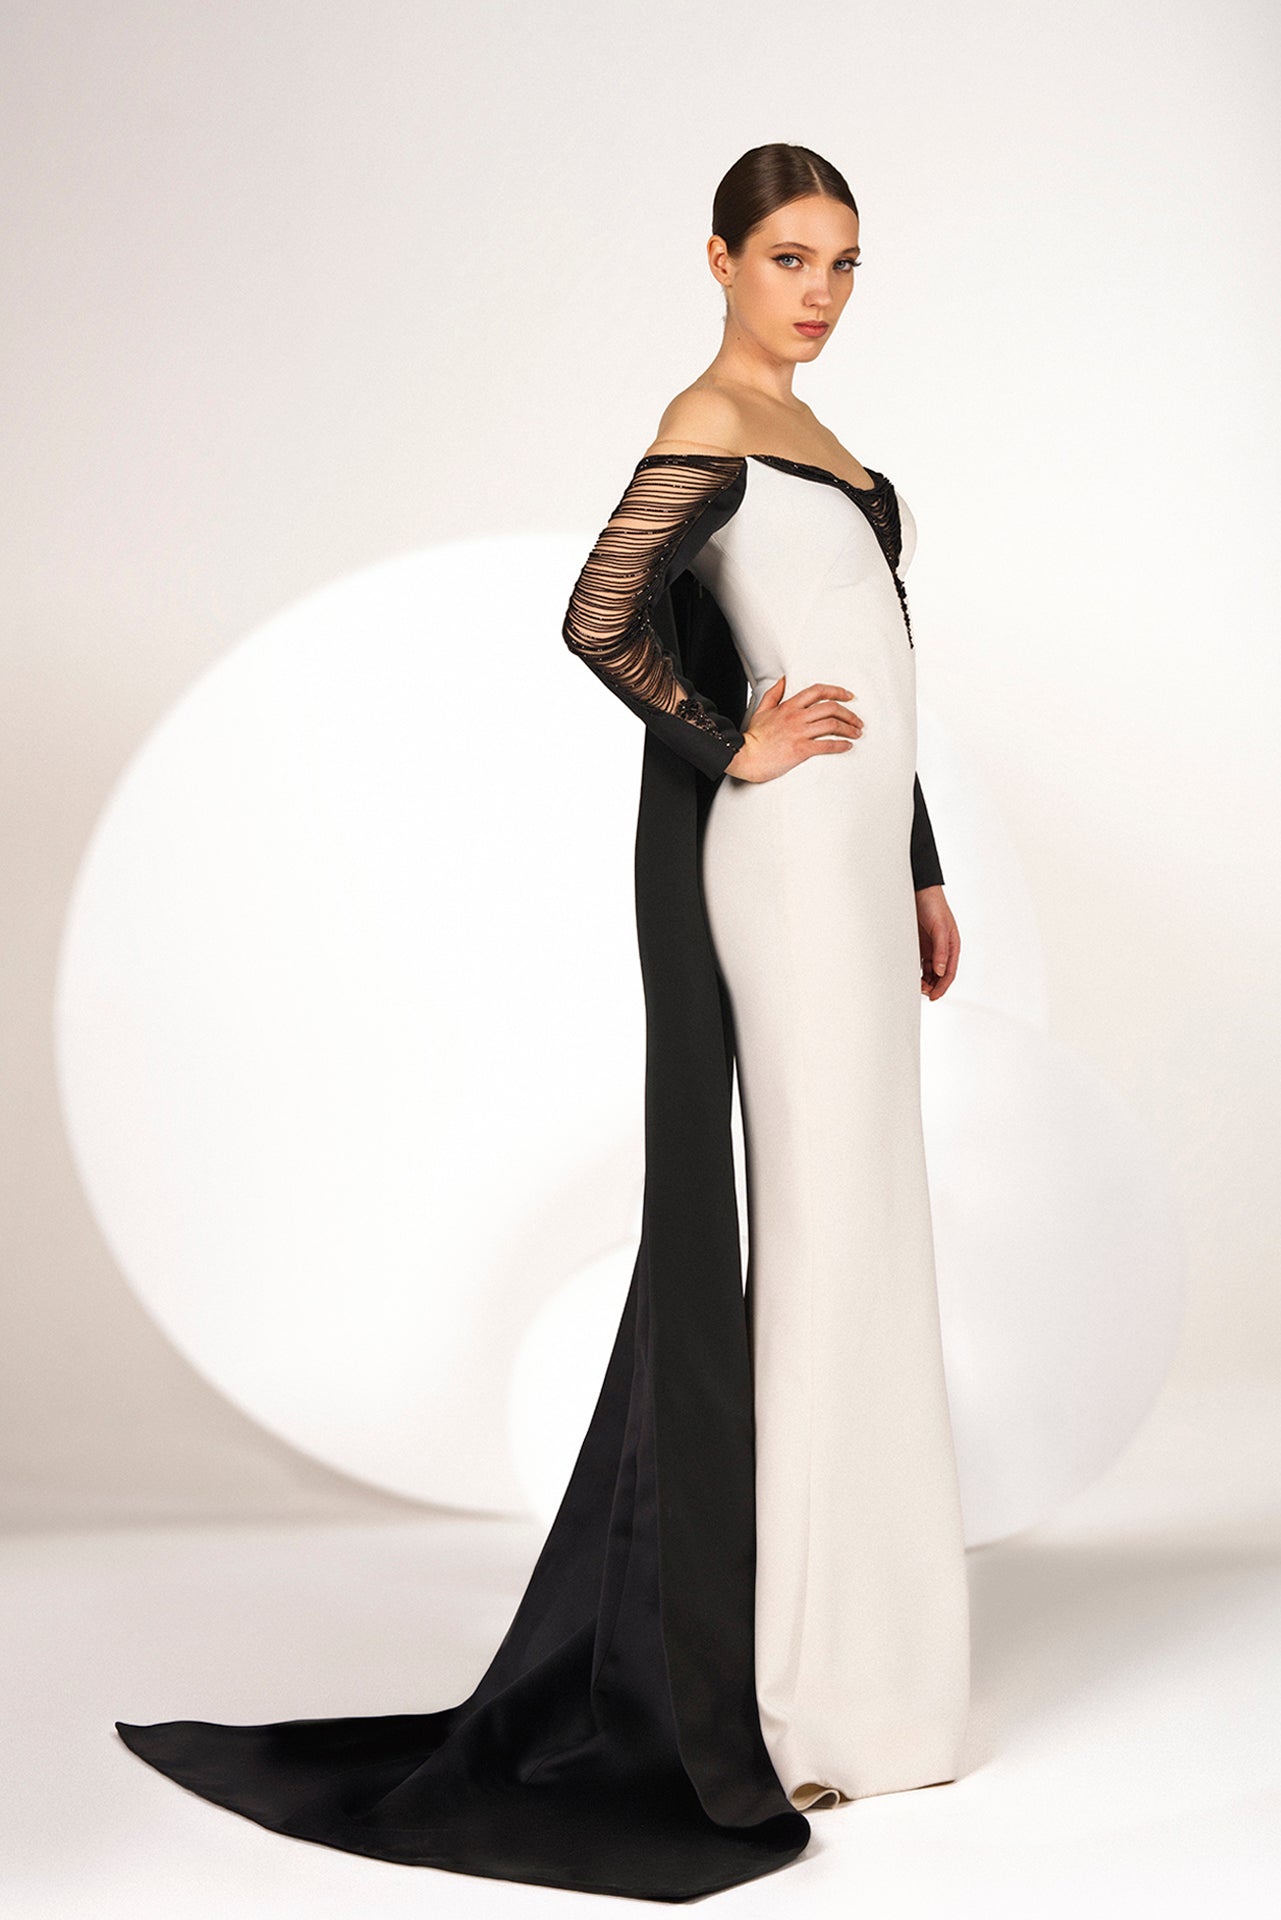 Off-Shoulder Black-and-White Mermaid Dress Cascading Fringes & Black Silenus on The Neckline and Sleeves